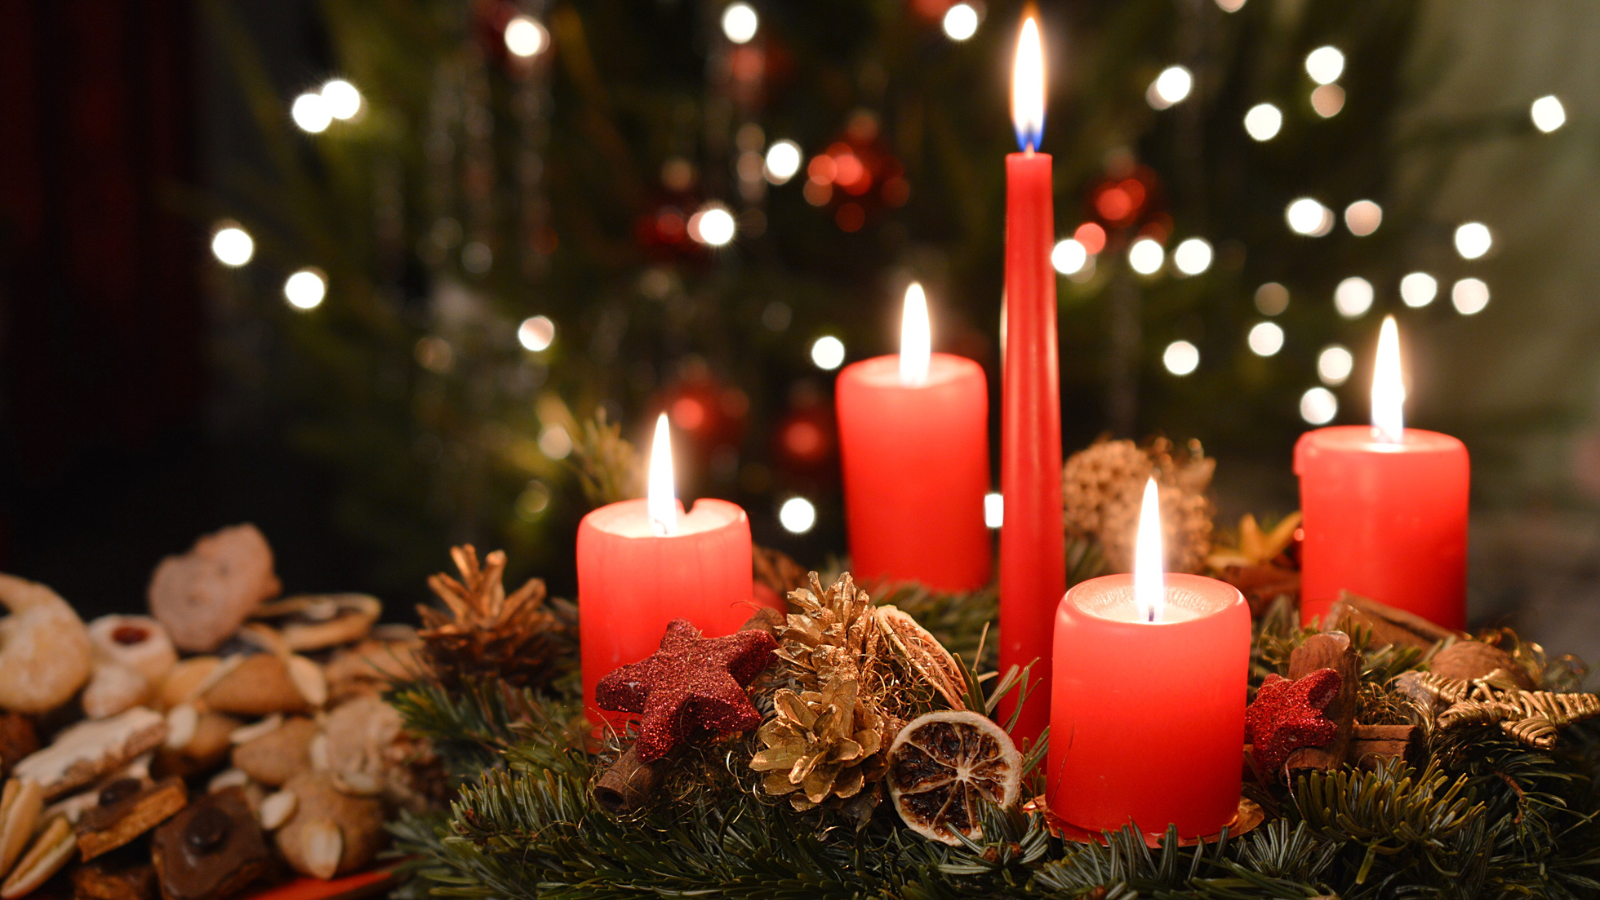 Ad advent wreath with red candles.